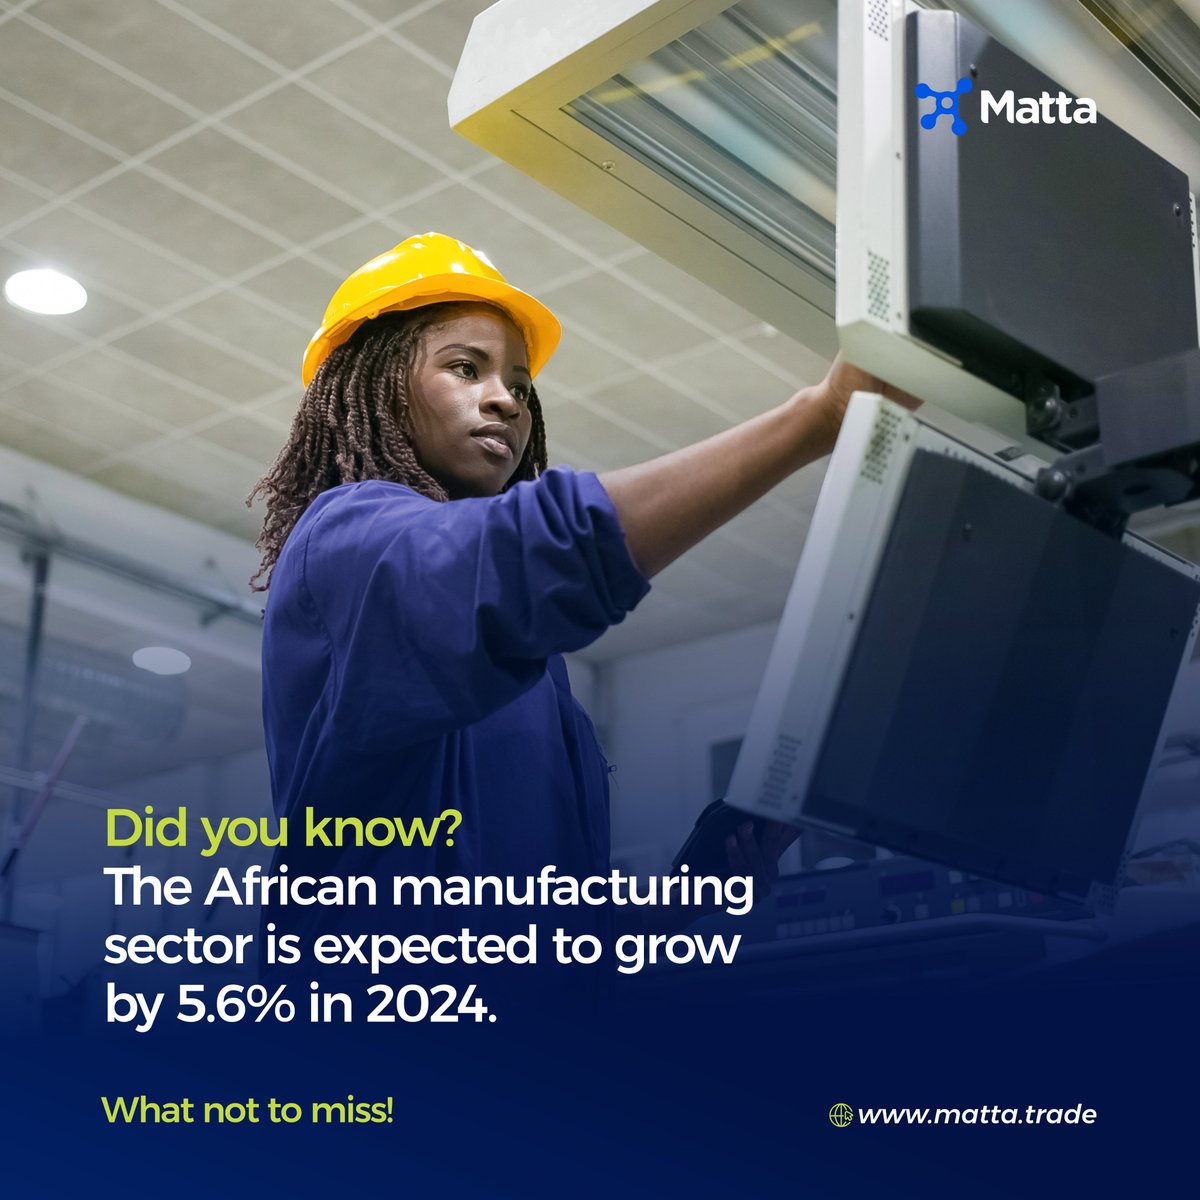 Africa's manufacturing sector is projected to SURGE by 5.6% in 2024!  #AfricaRising 
It's an exciting time to join the industrial revolution!  #ManufacturingGrowth

Here's what's fueling this growth: